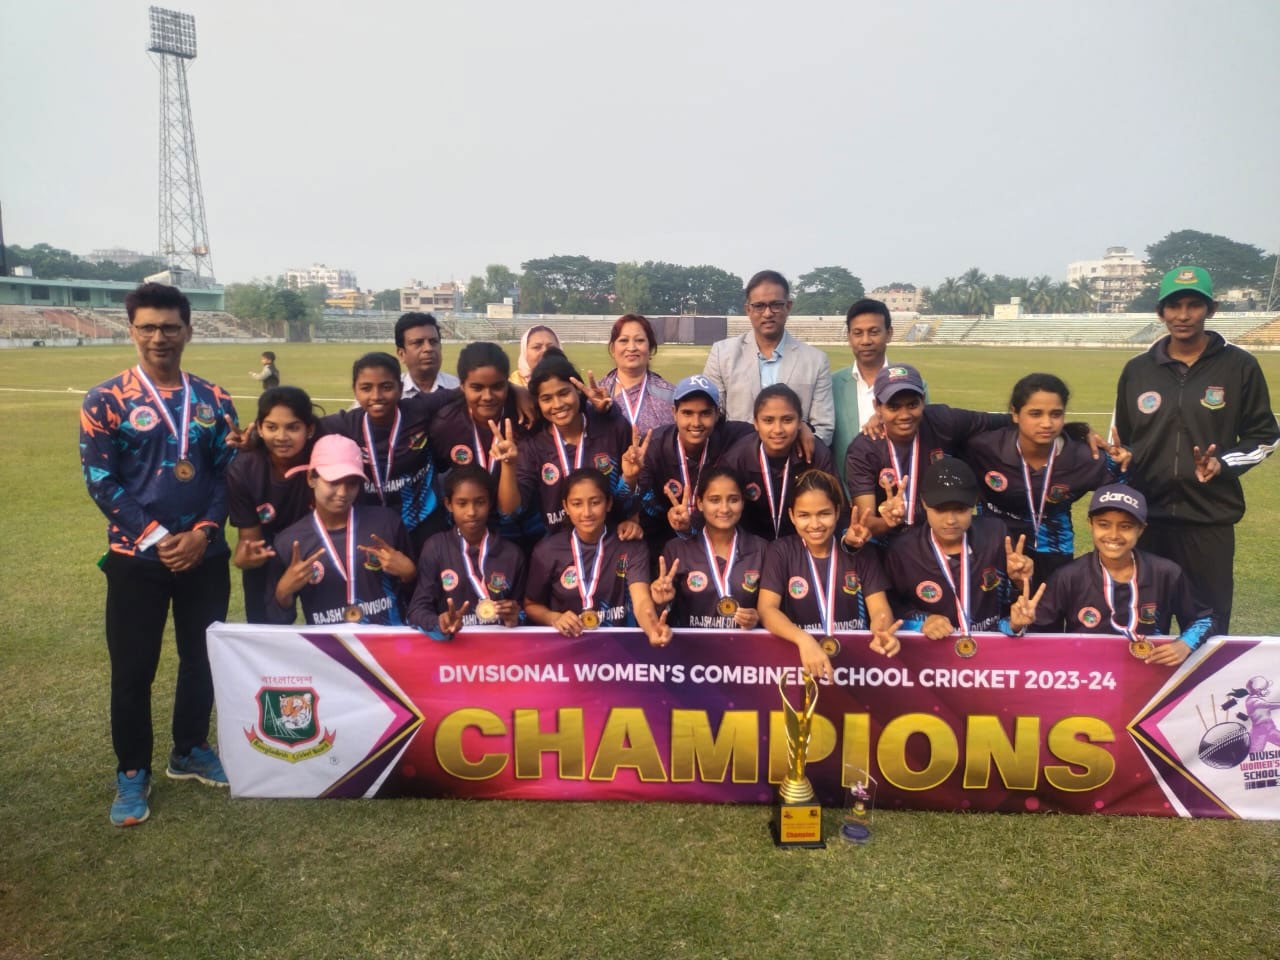 Rajshahi Team emerged as the Champions of the first edition of the Divisional Women’s Combined School Cricket 2023-24